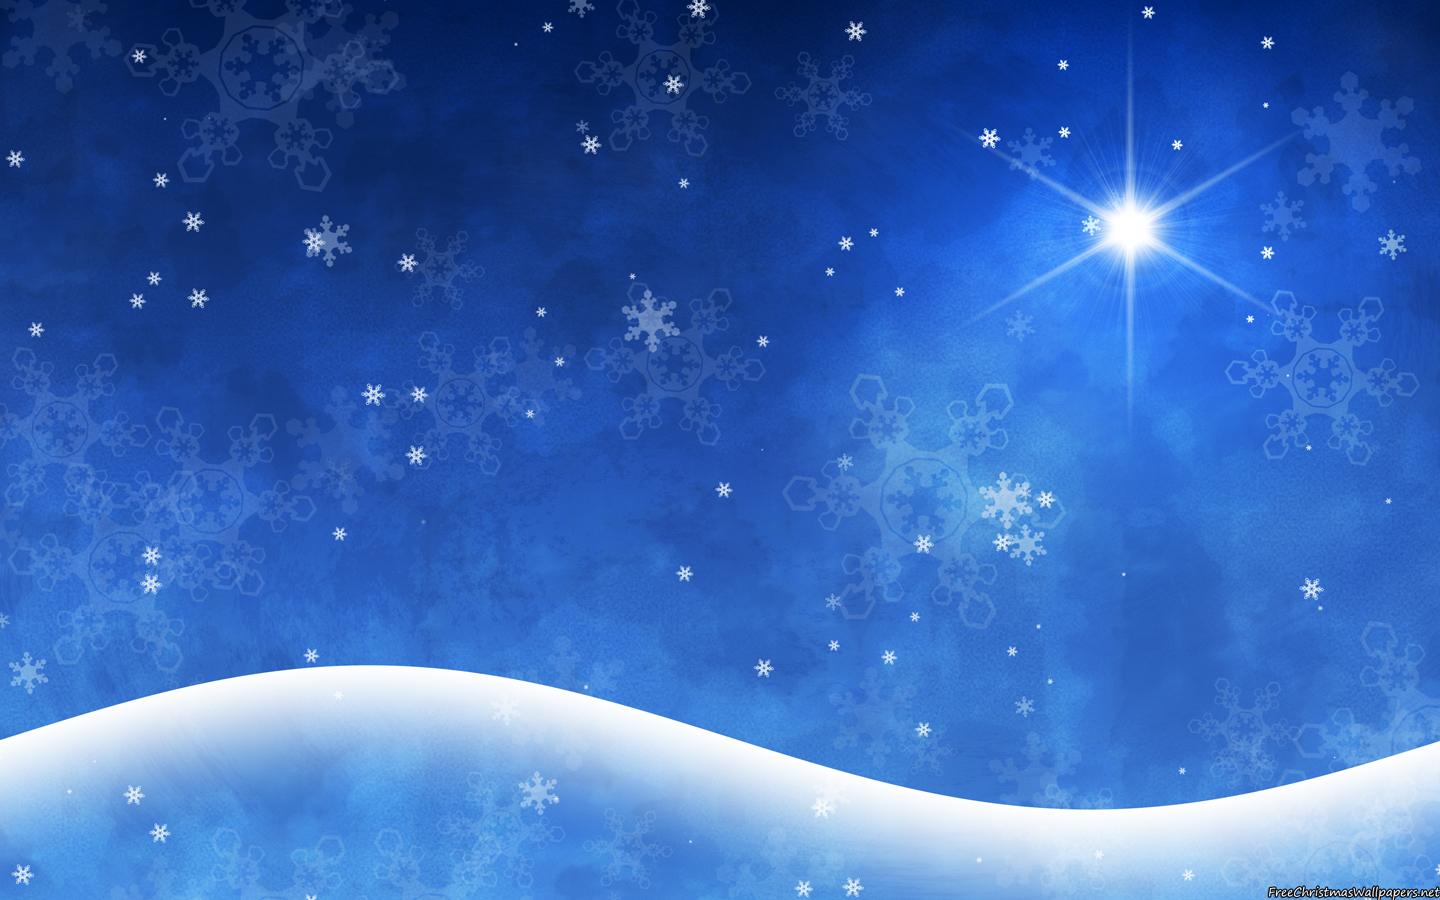 Free Download Fusing Marketing Grunge Winter Christmas Background 1440 [1440x900] For Your